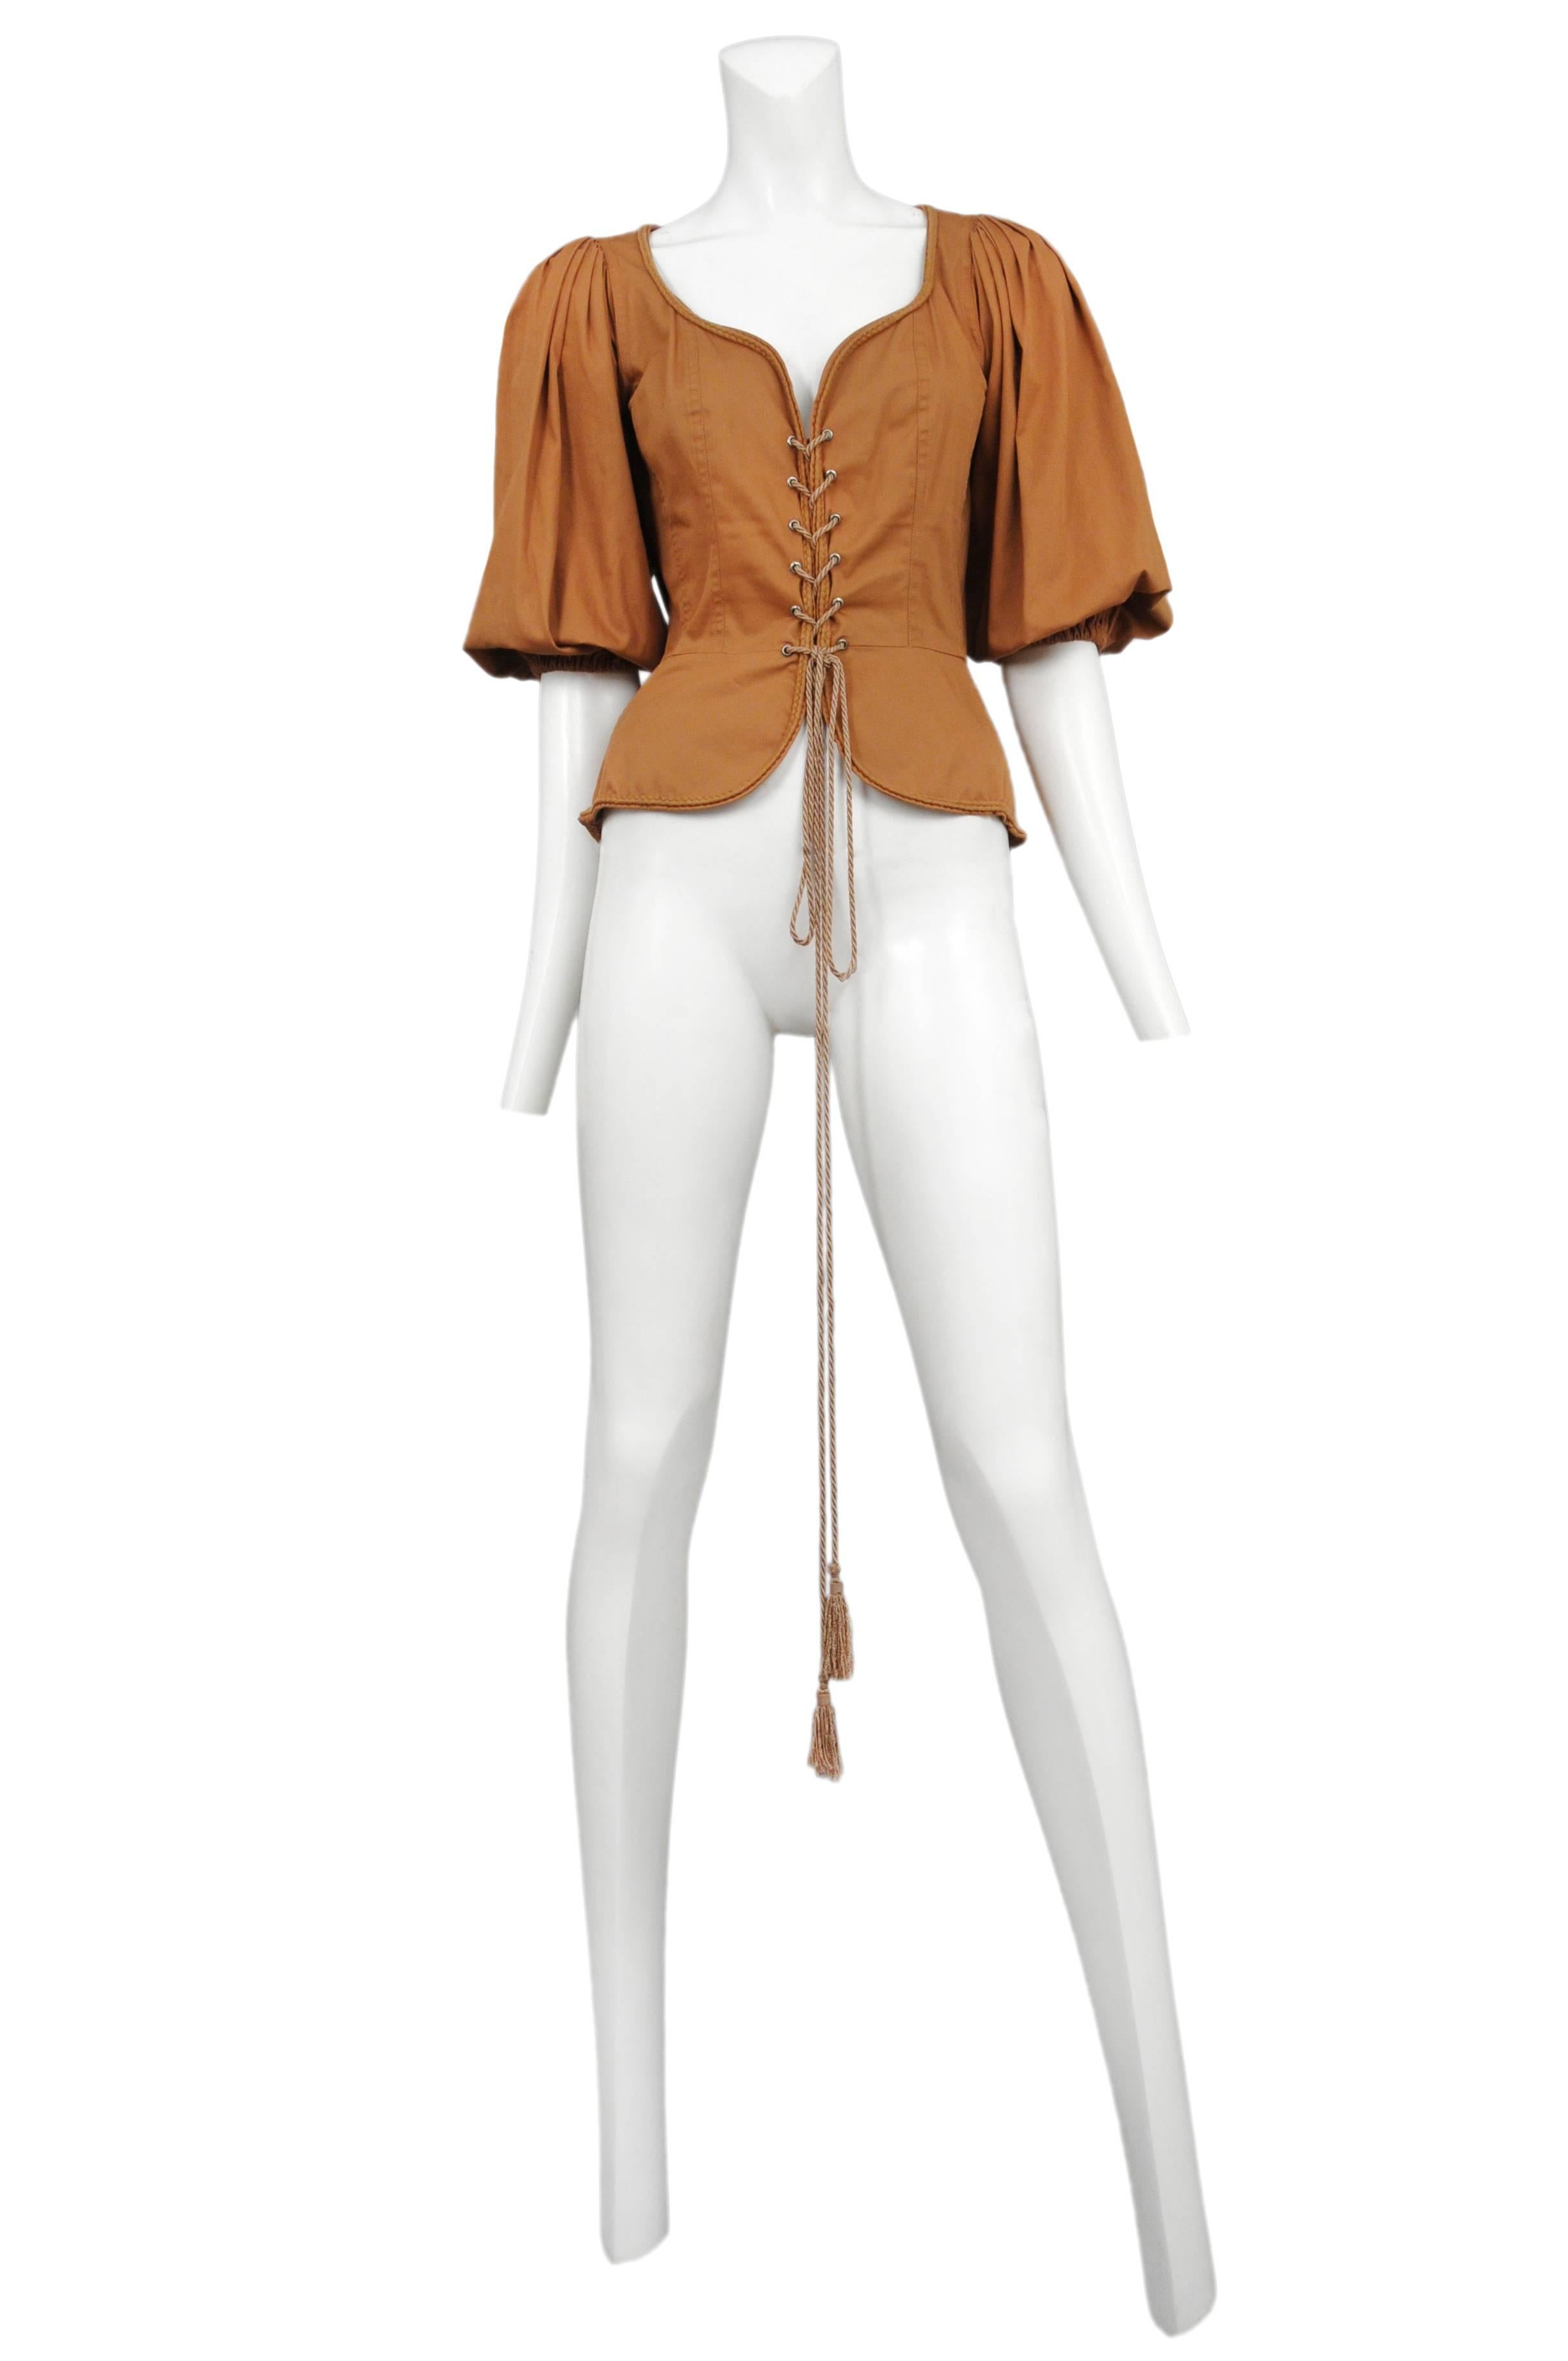 Vintage Yves Saint Laurent khaki safari corset peasant top featuring a built in peplum below the waist, tassel cording lacing up the front and full peasant style sleeves.
Please inquire for additional images.